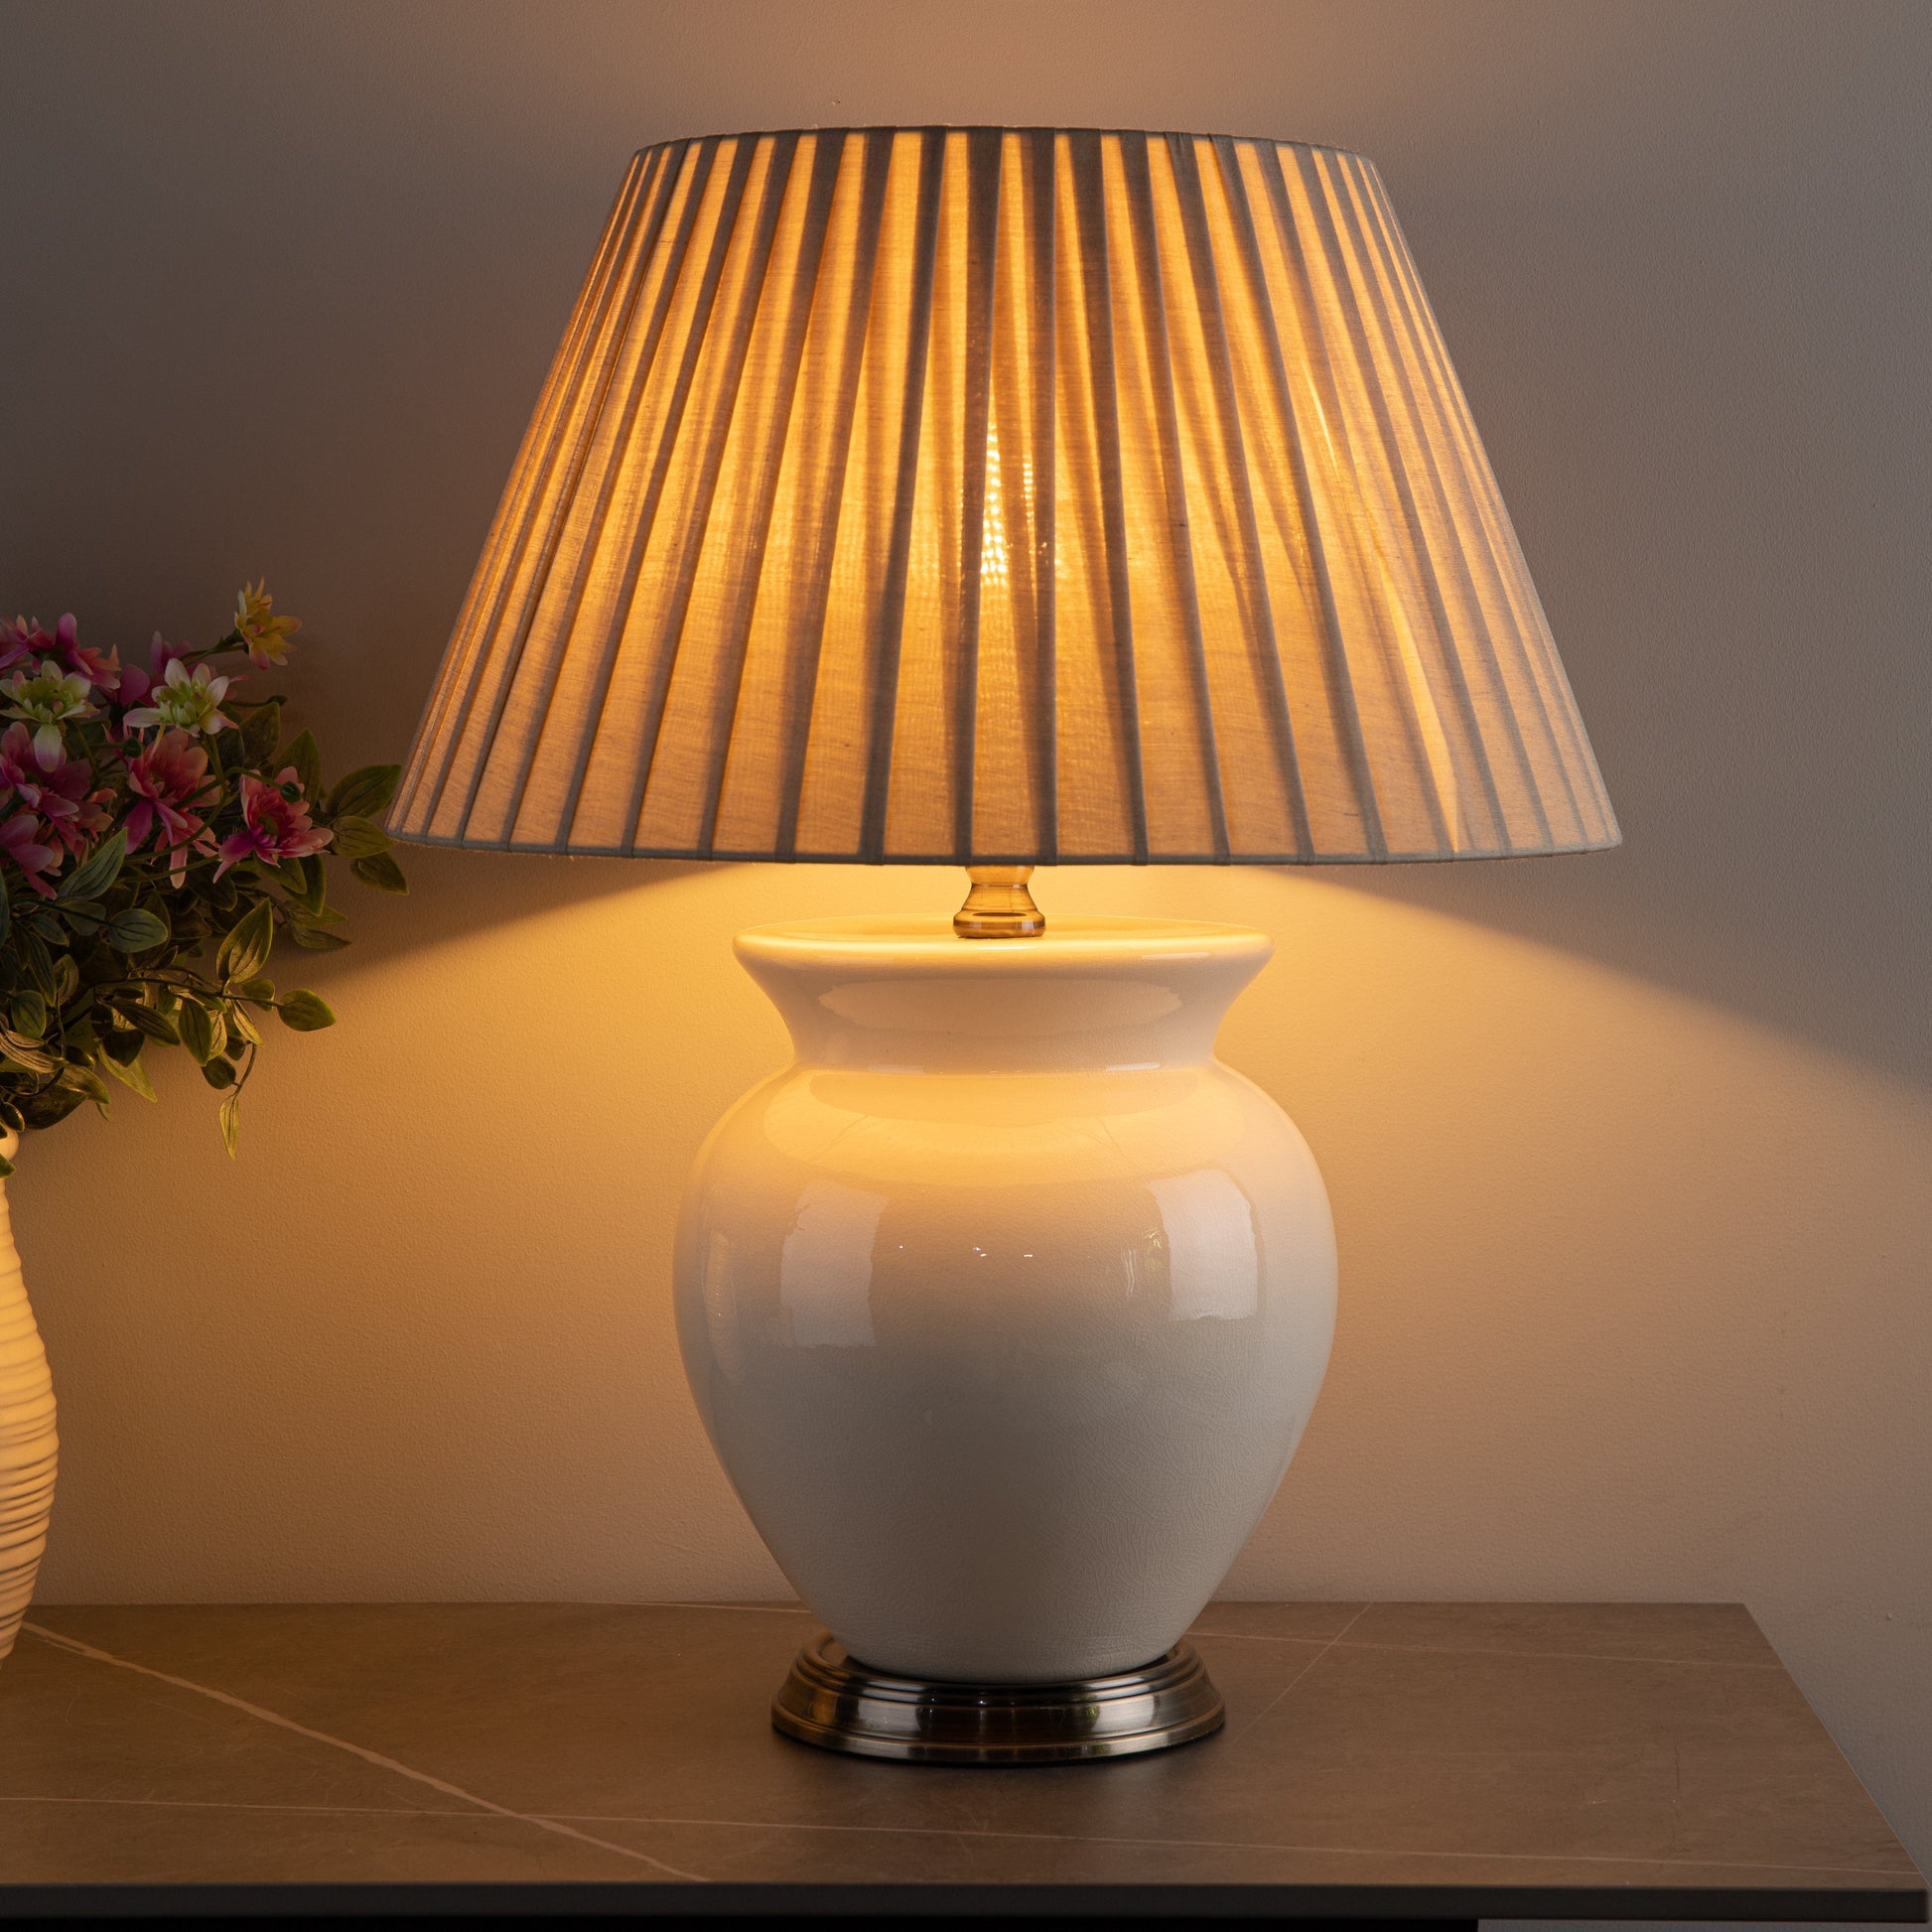 Lights  -  Pacific Lifestyle Ivory Ceramic Table Lamp  -  50105654